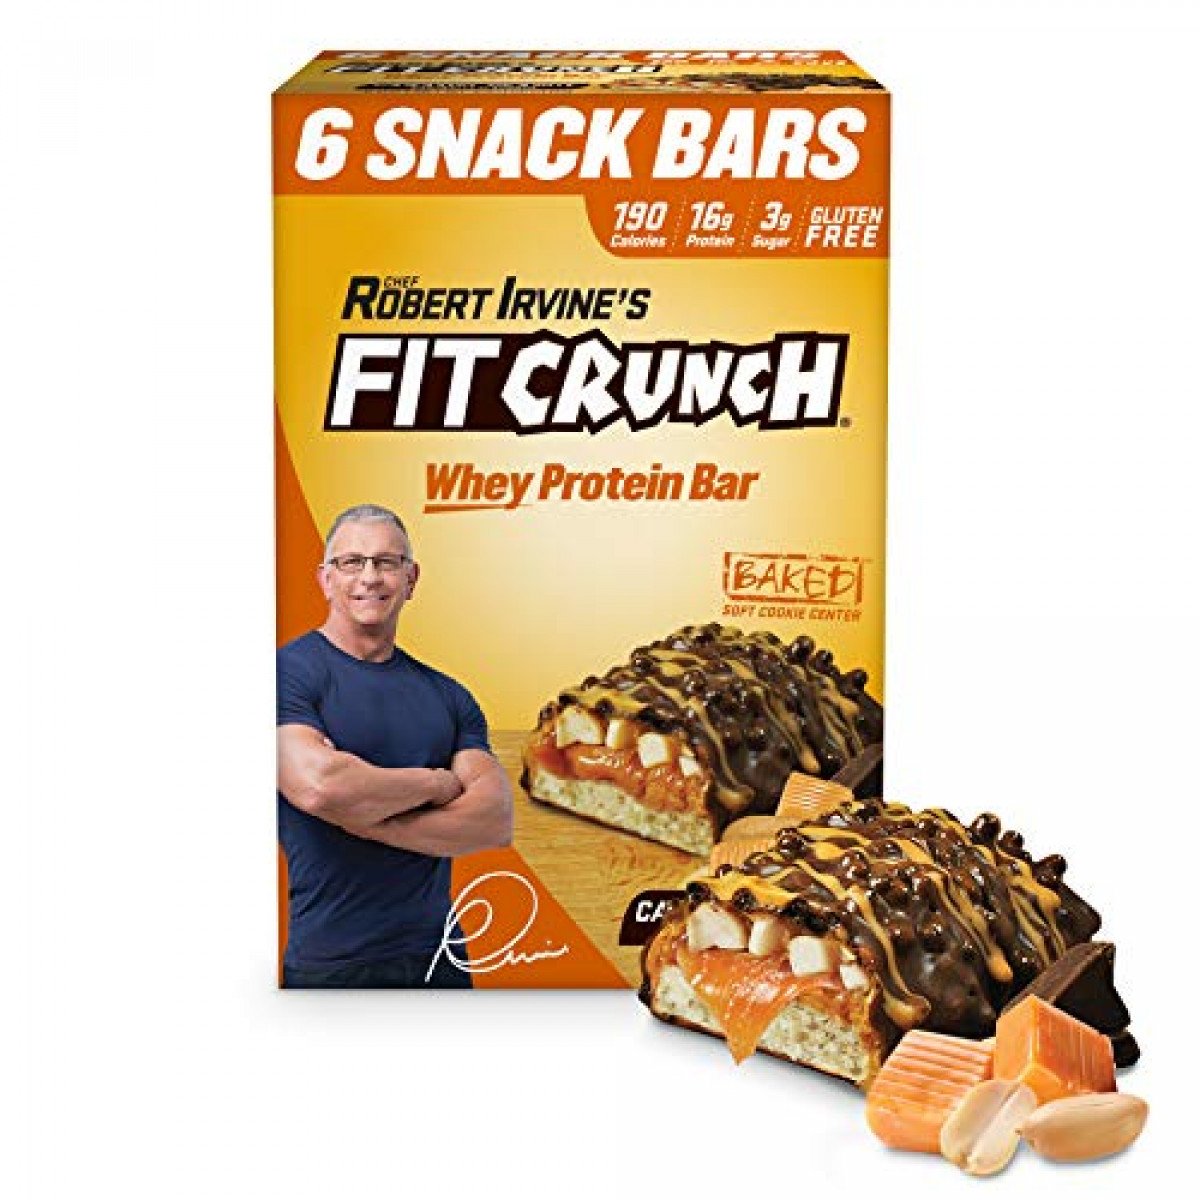 FITCRUNCH Snack Size Protein Bars, Designed by Robert